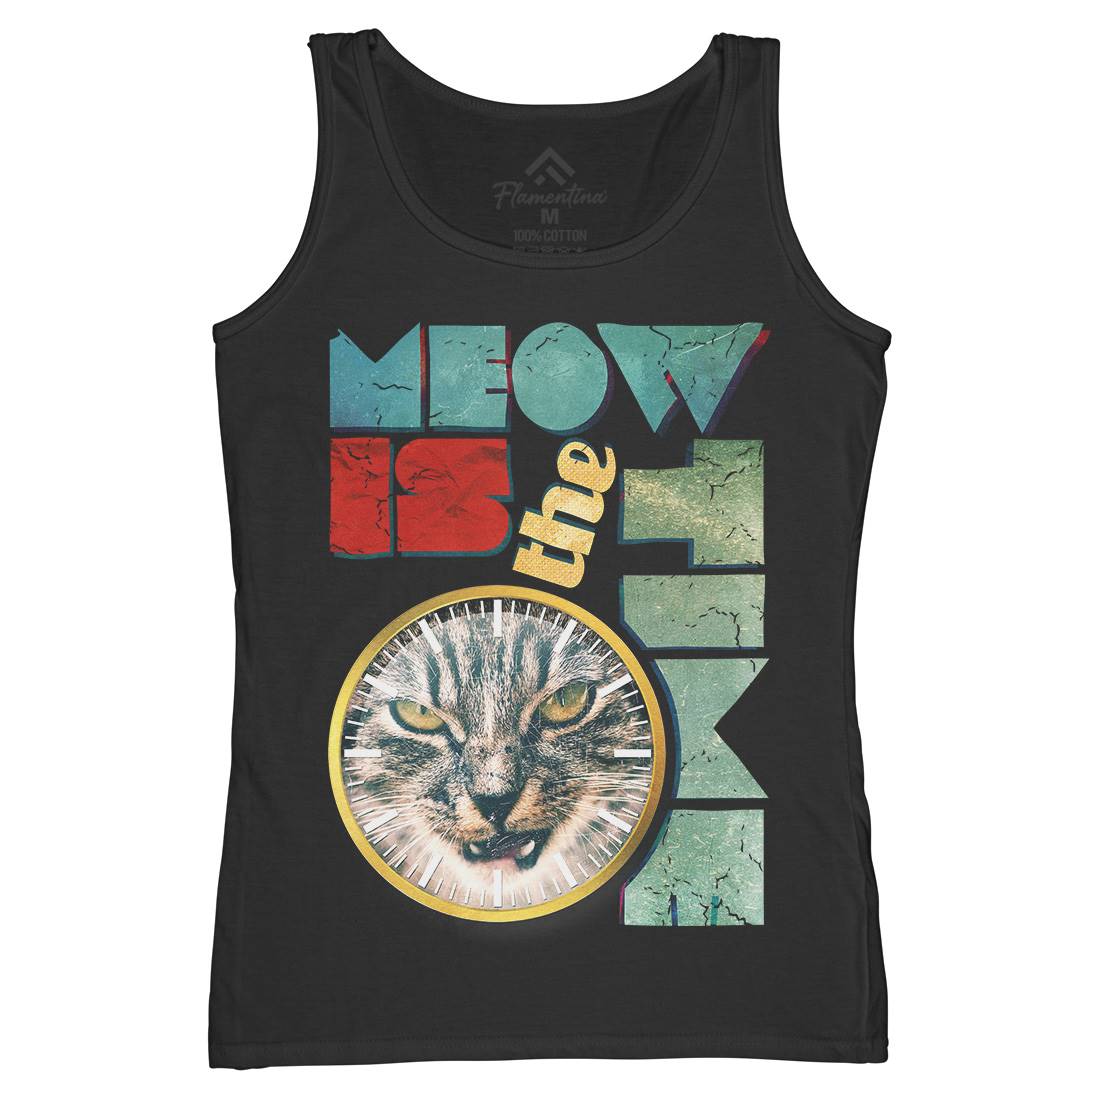 Meow Is The Time Womens Organic Tank Top Vest Animals A876